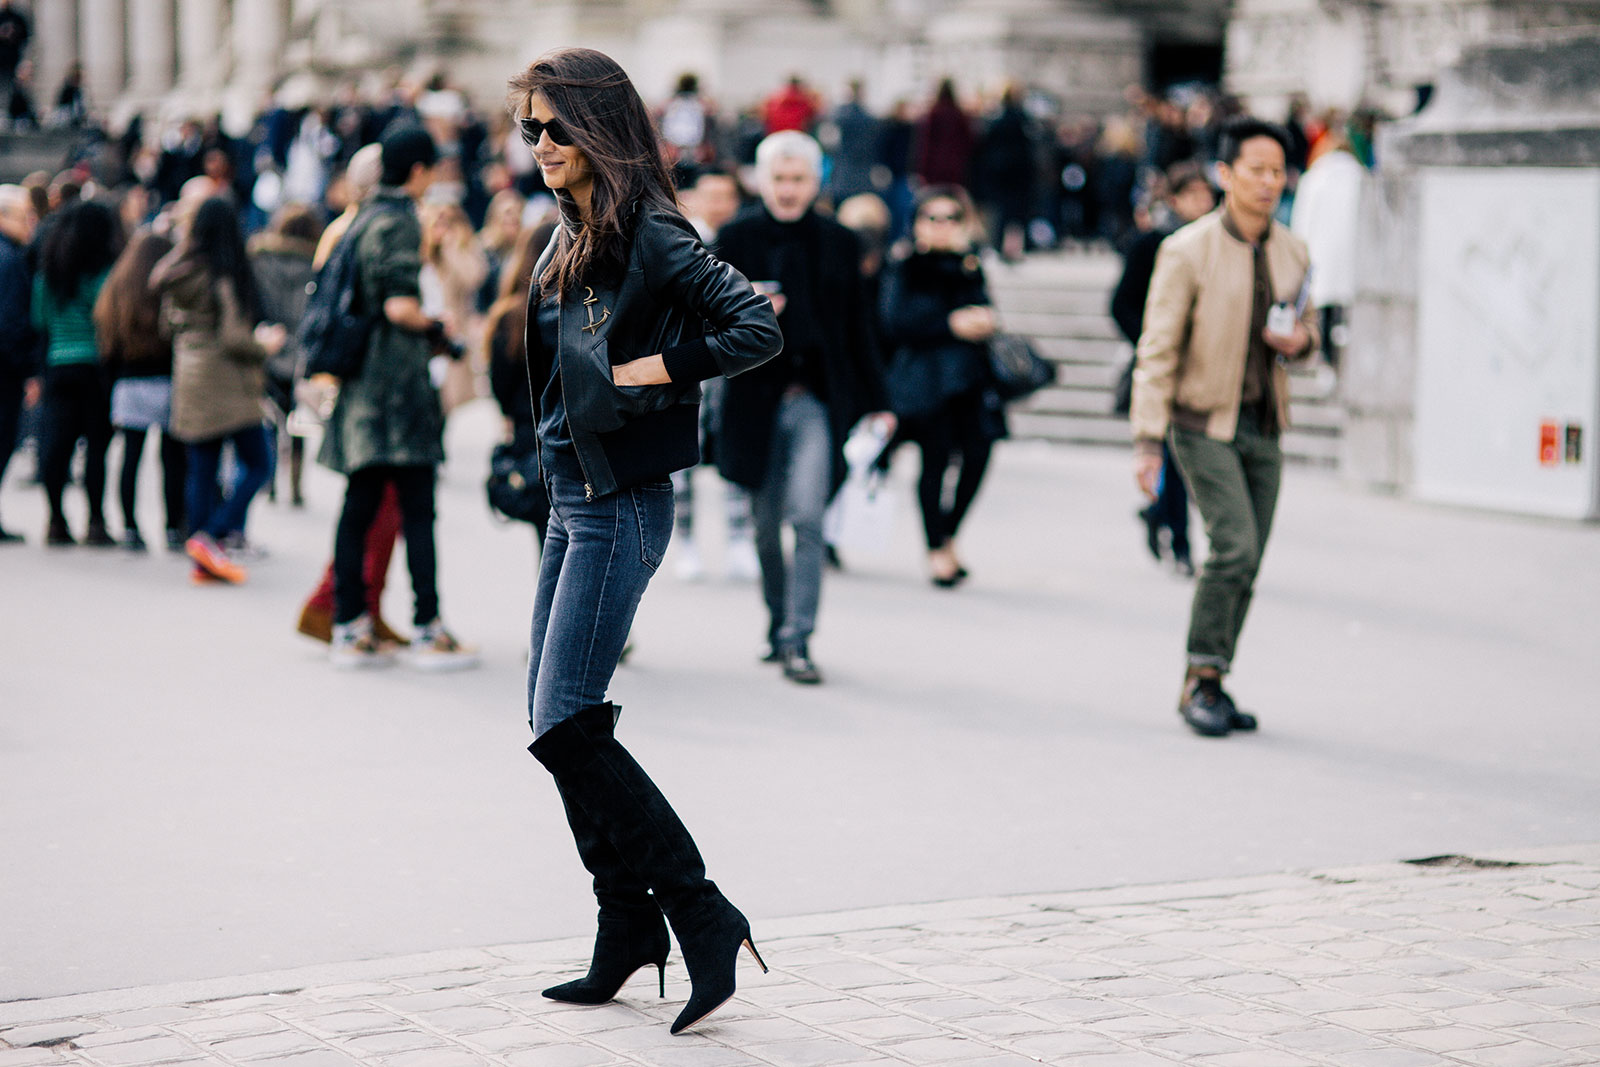 Barbara Martelo wearing jeans and boots in Paris, France